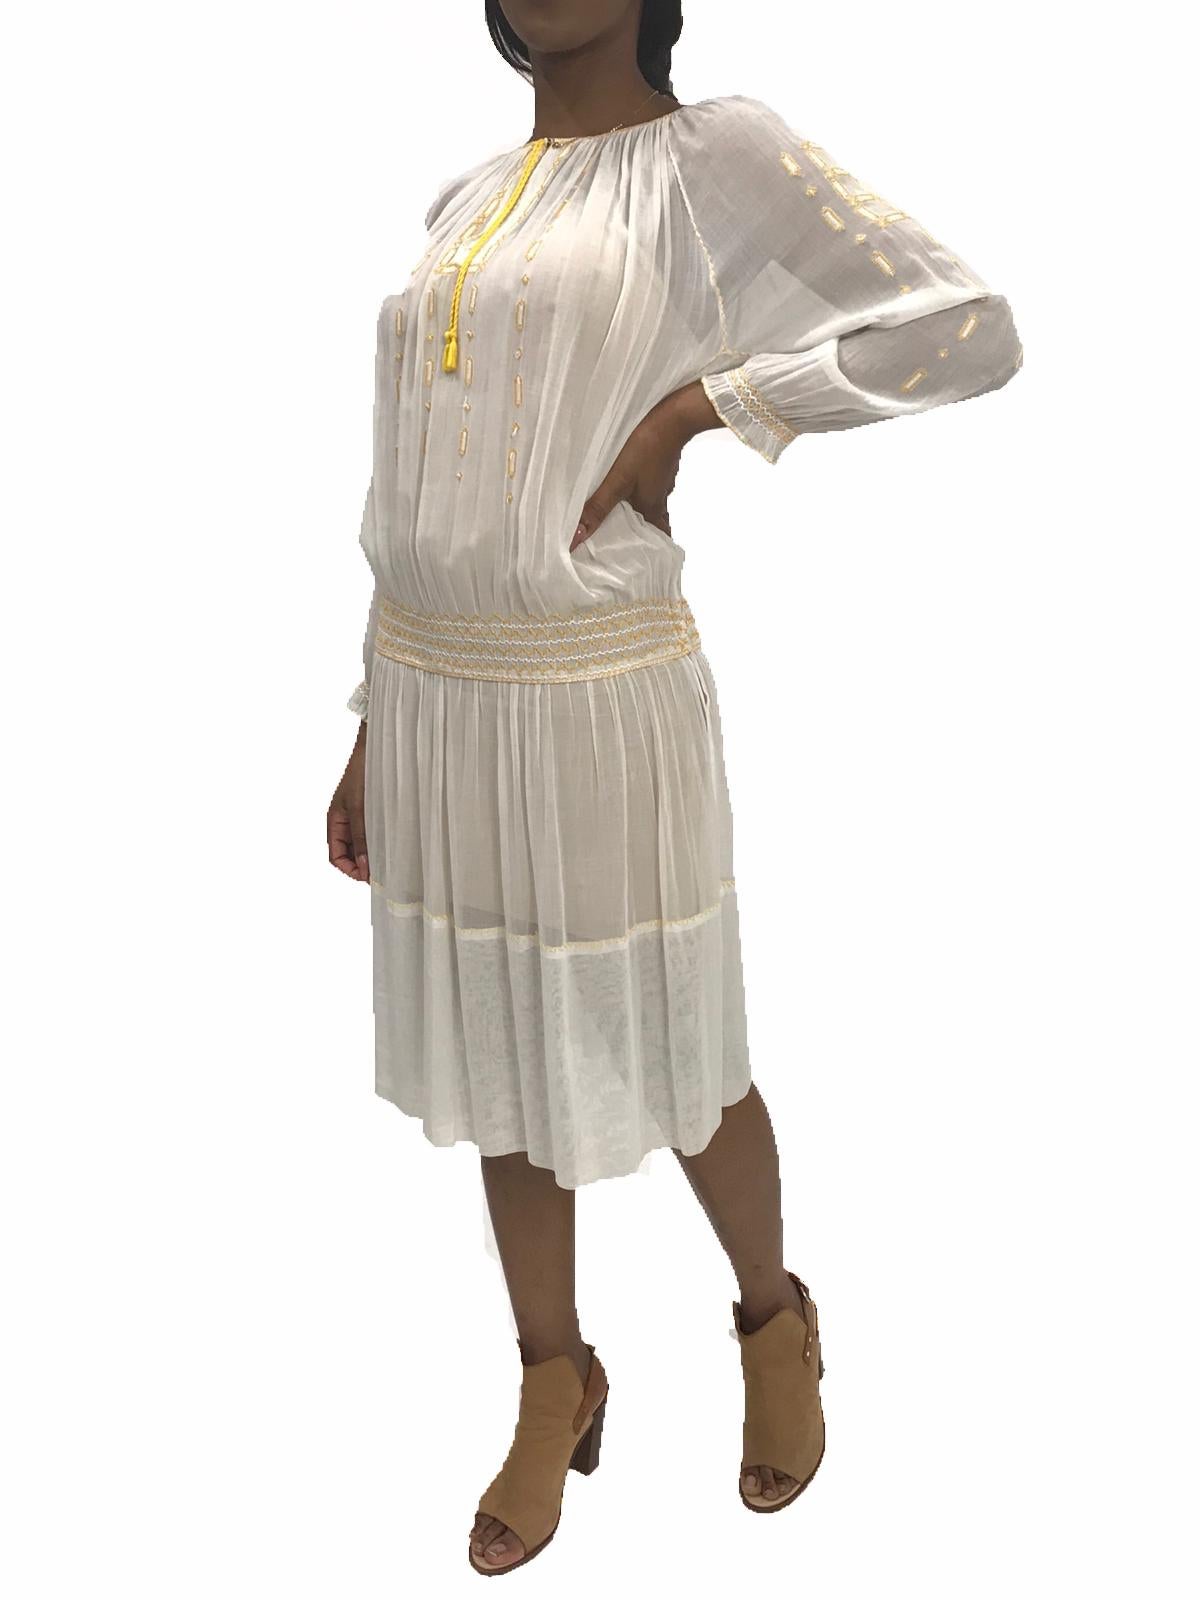 Beige 1920S Sheer Cotton Boho Folk Dress With Yellow Hand Embroidery & Smocking For Sale